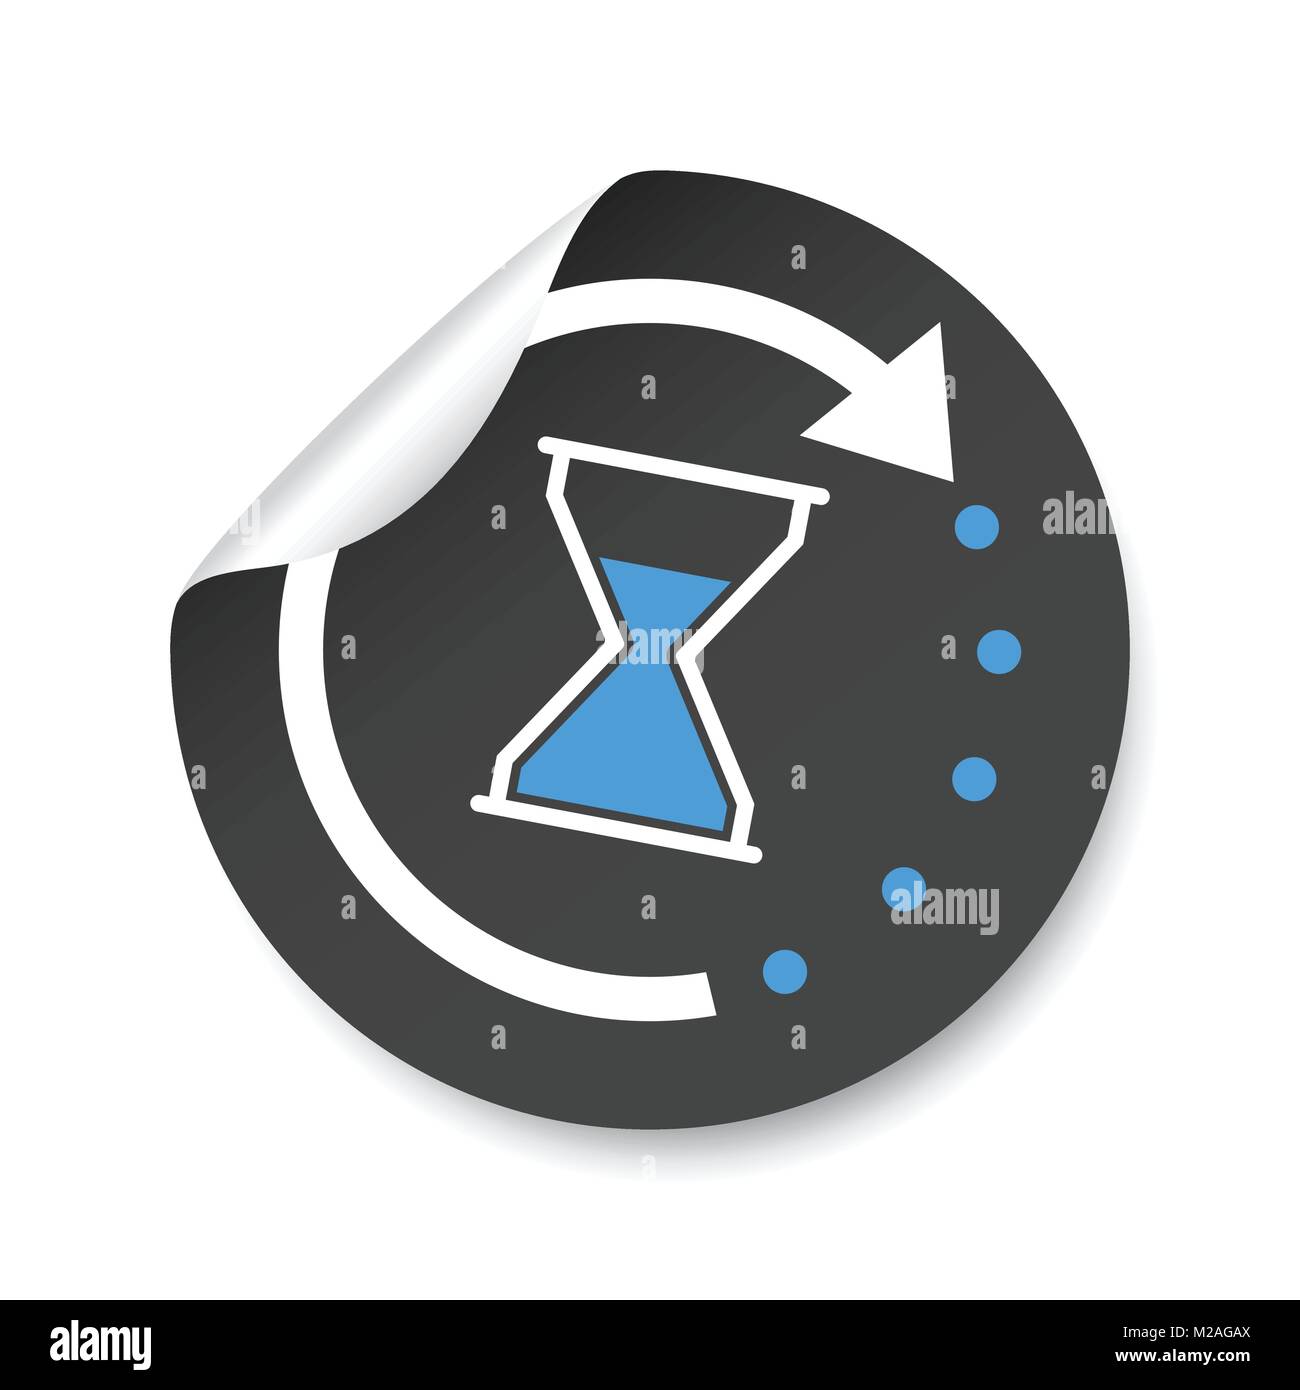 Time sticker icon. Flat vector illustration with hourglass on white background. Stock Vector